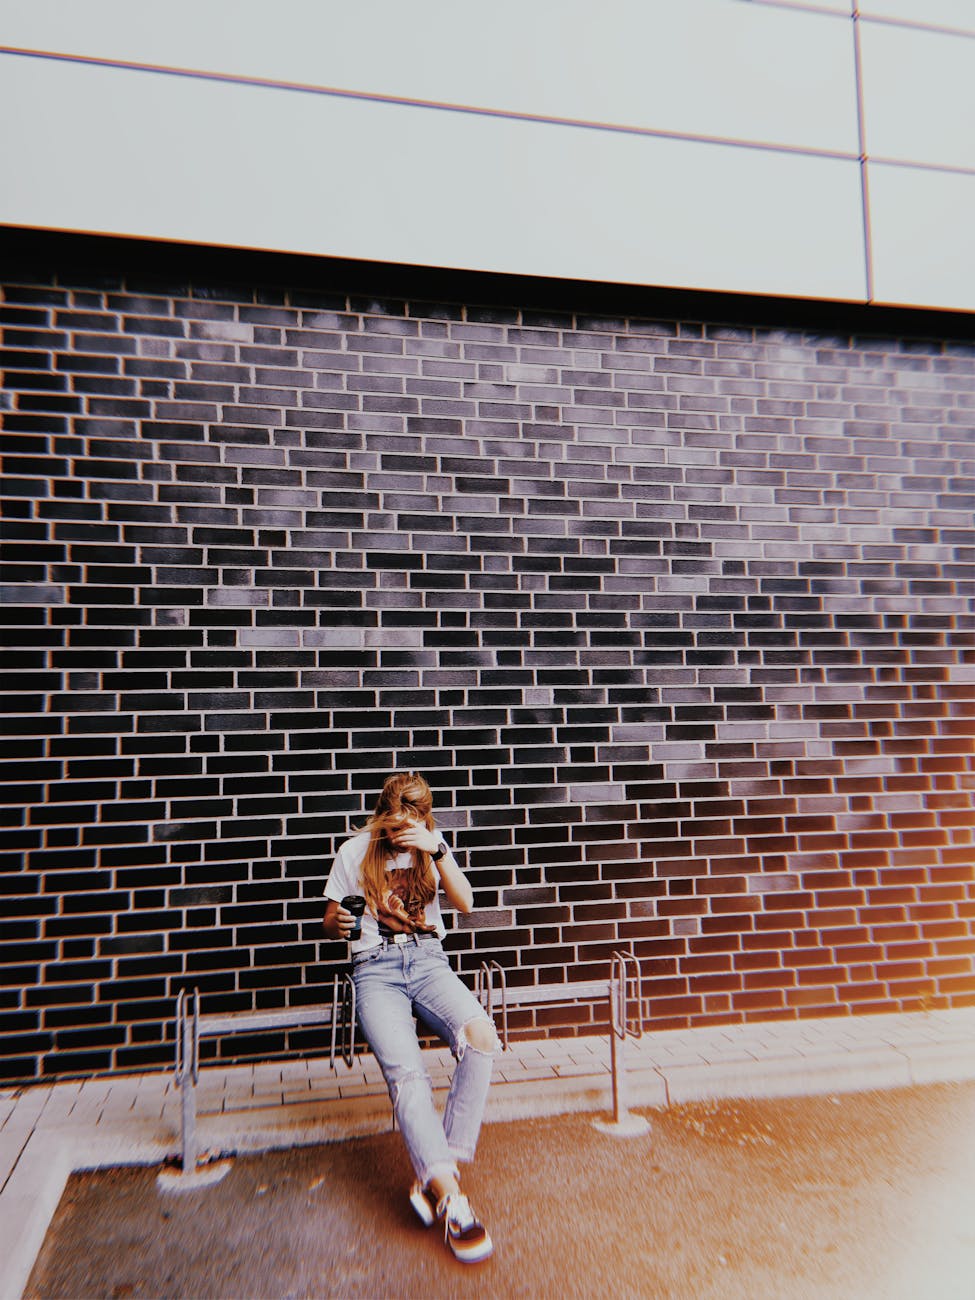 Woman Sitting on Bench Beside Wall · Free Stock Photo